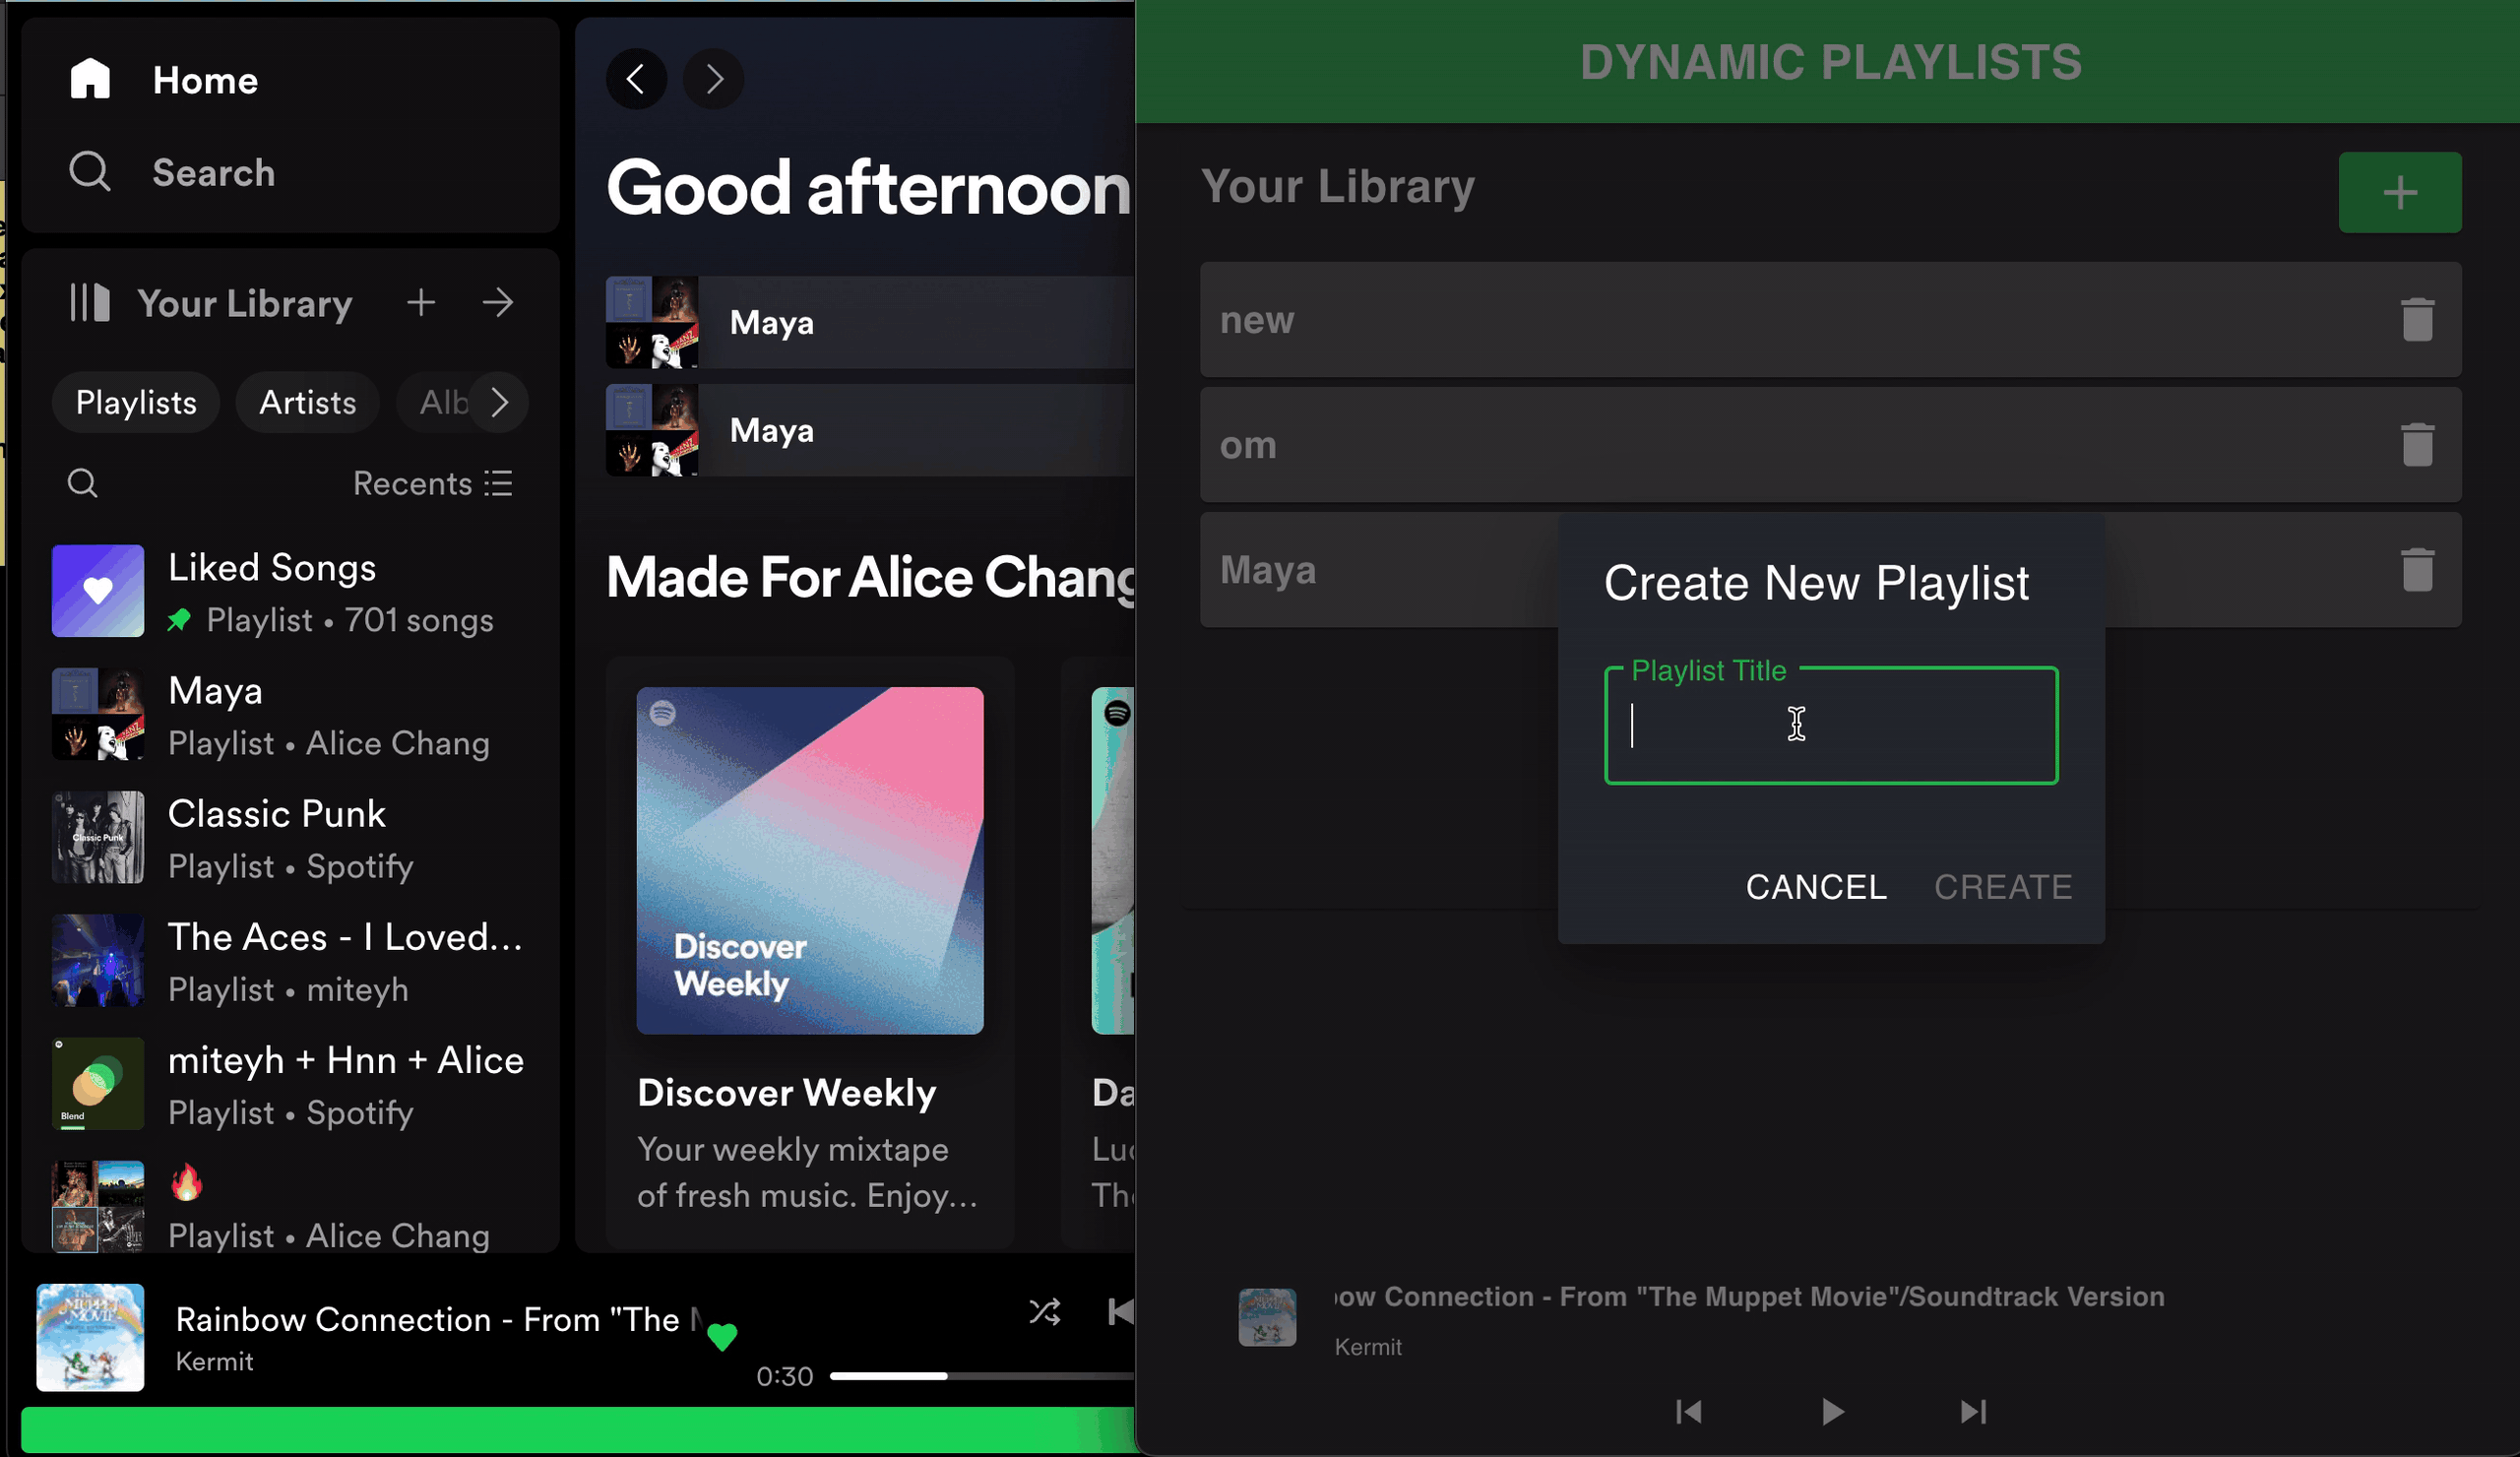 GIF of the Dynamic Playlists app in action creating a playlist, publishing it and then playback